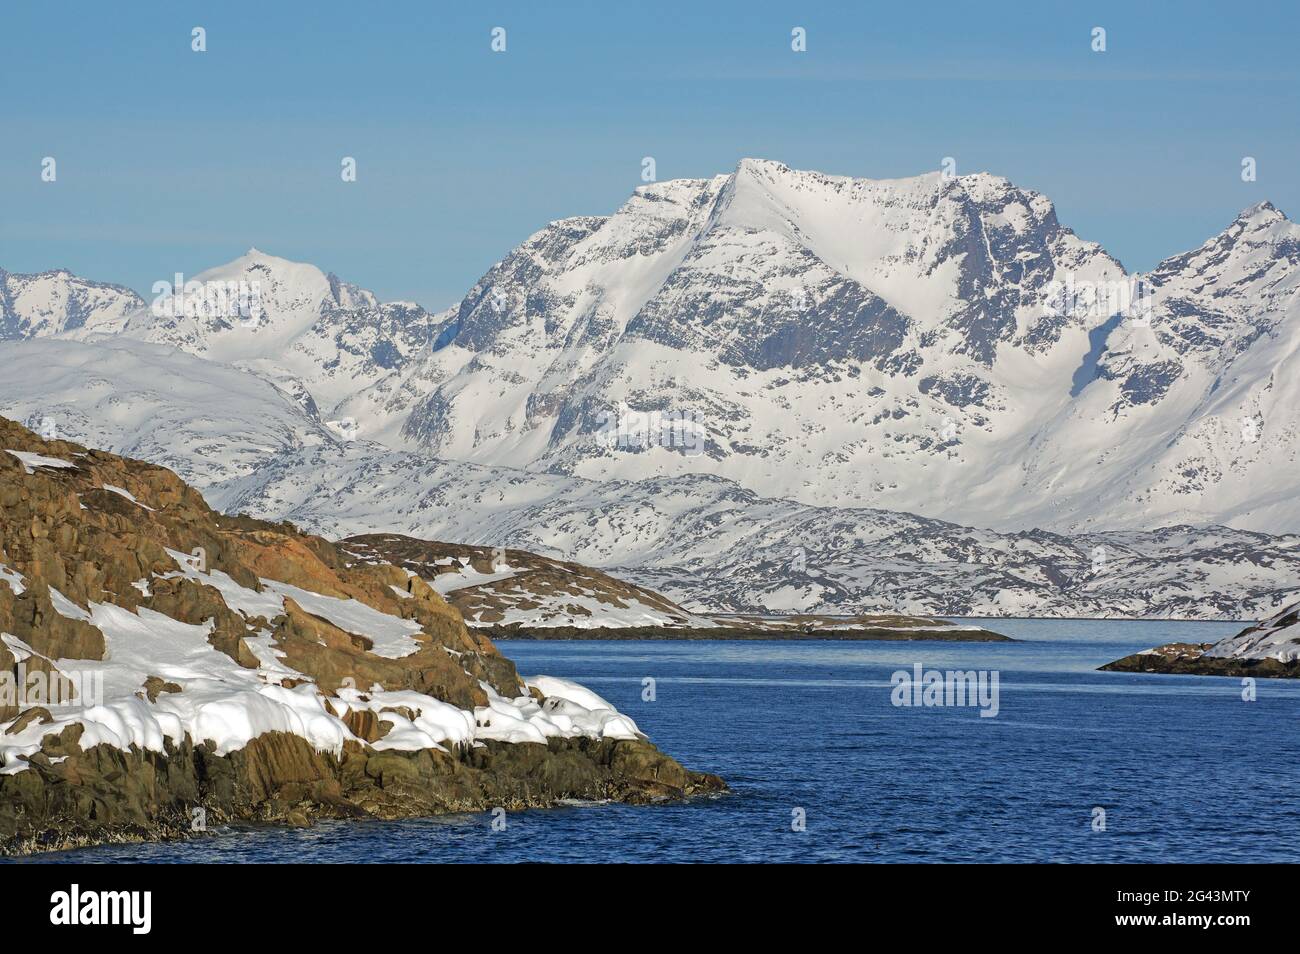 Late winter scenery at the west coast of greenland Stock Photo